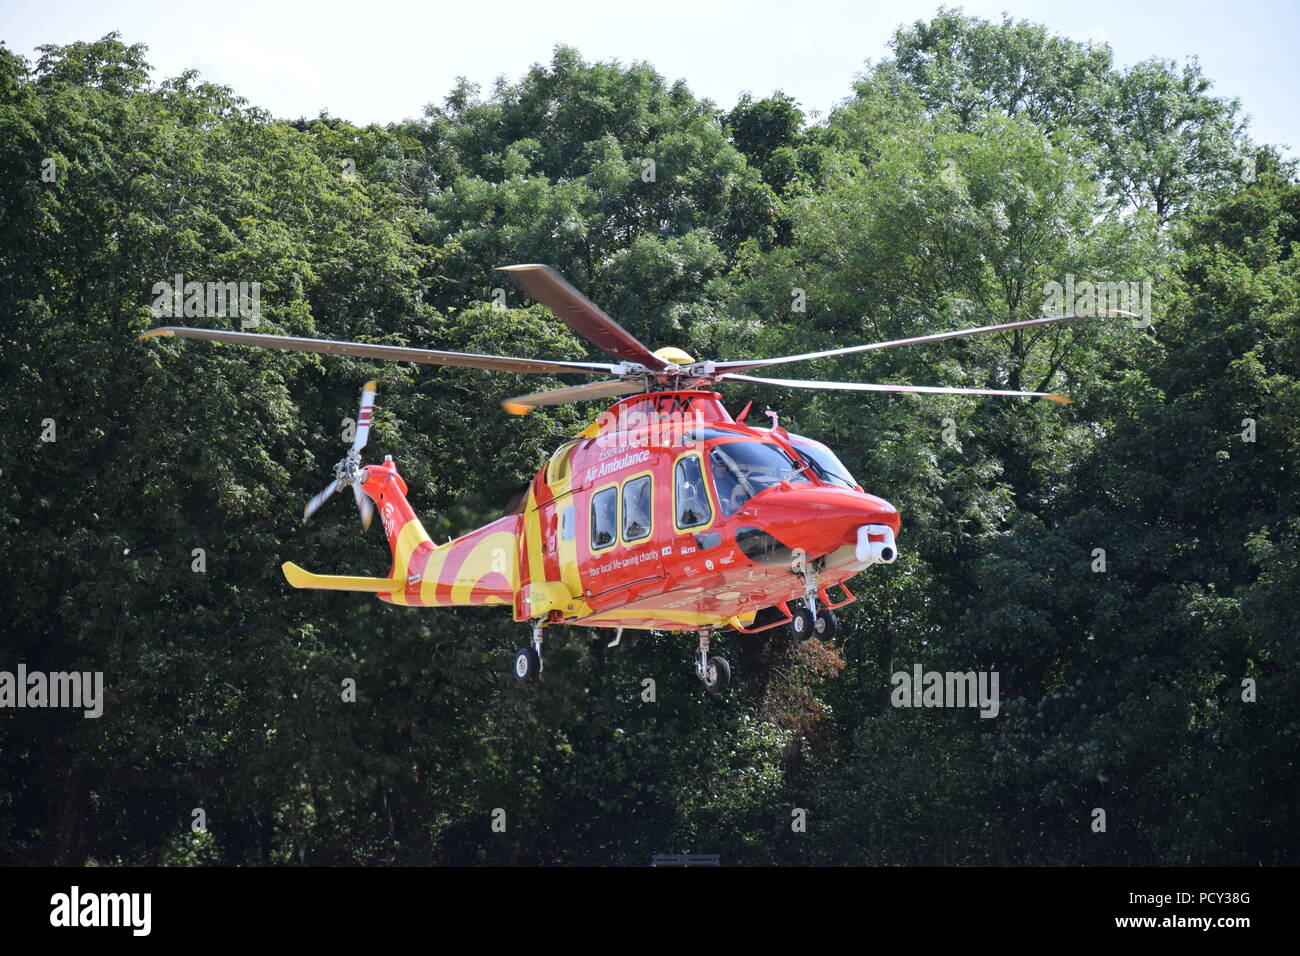 Essex Herts Air Ambulance Helicopter Stock Photo